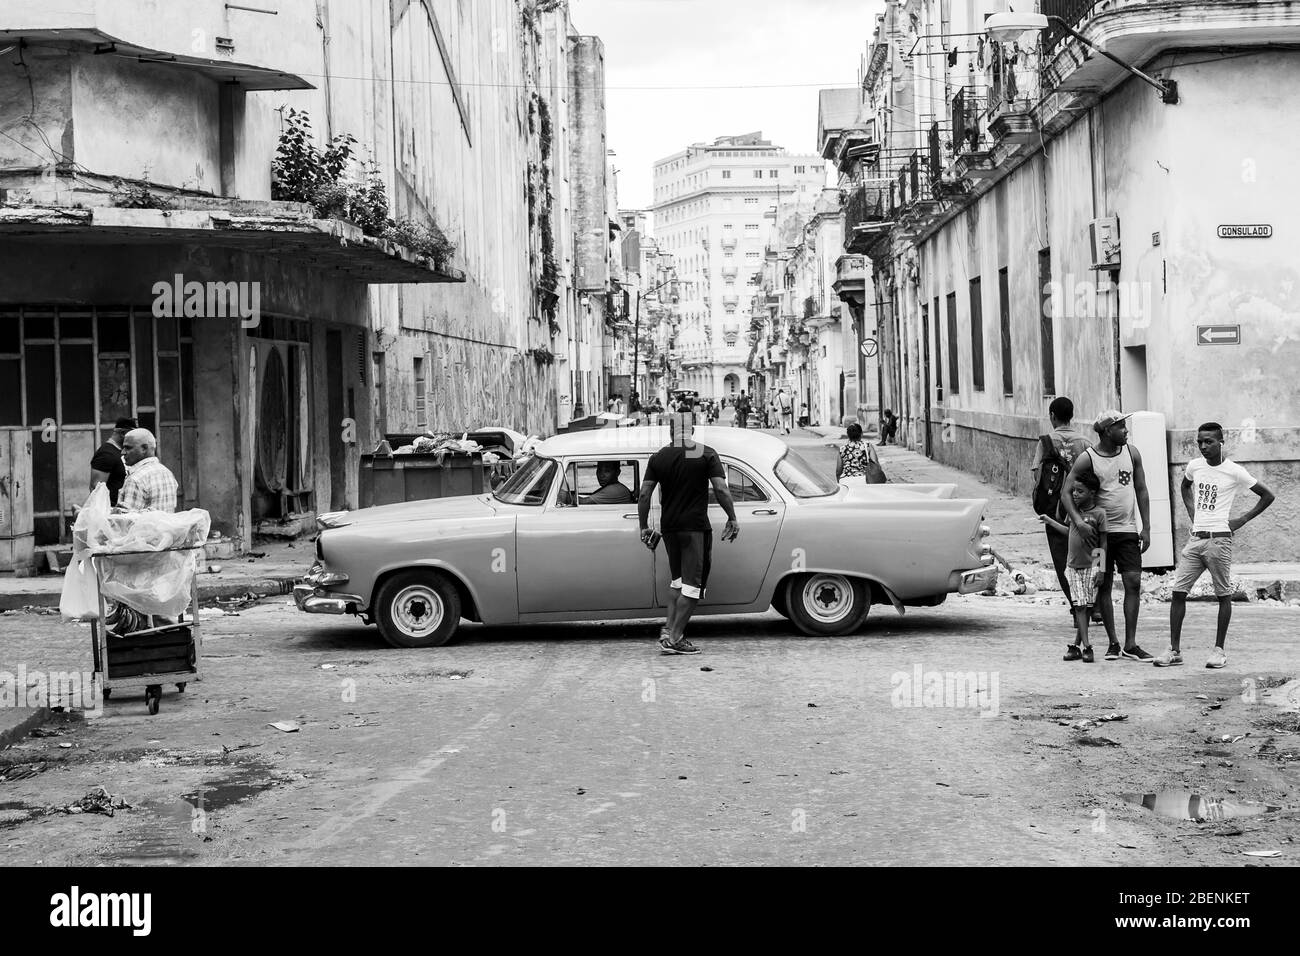 Looking over Calle Consulado in Cento Havana, Cuba as a classical car passes some locals on the streets.  Captured in November 2015. Stock Photo